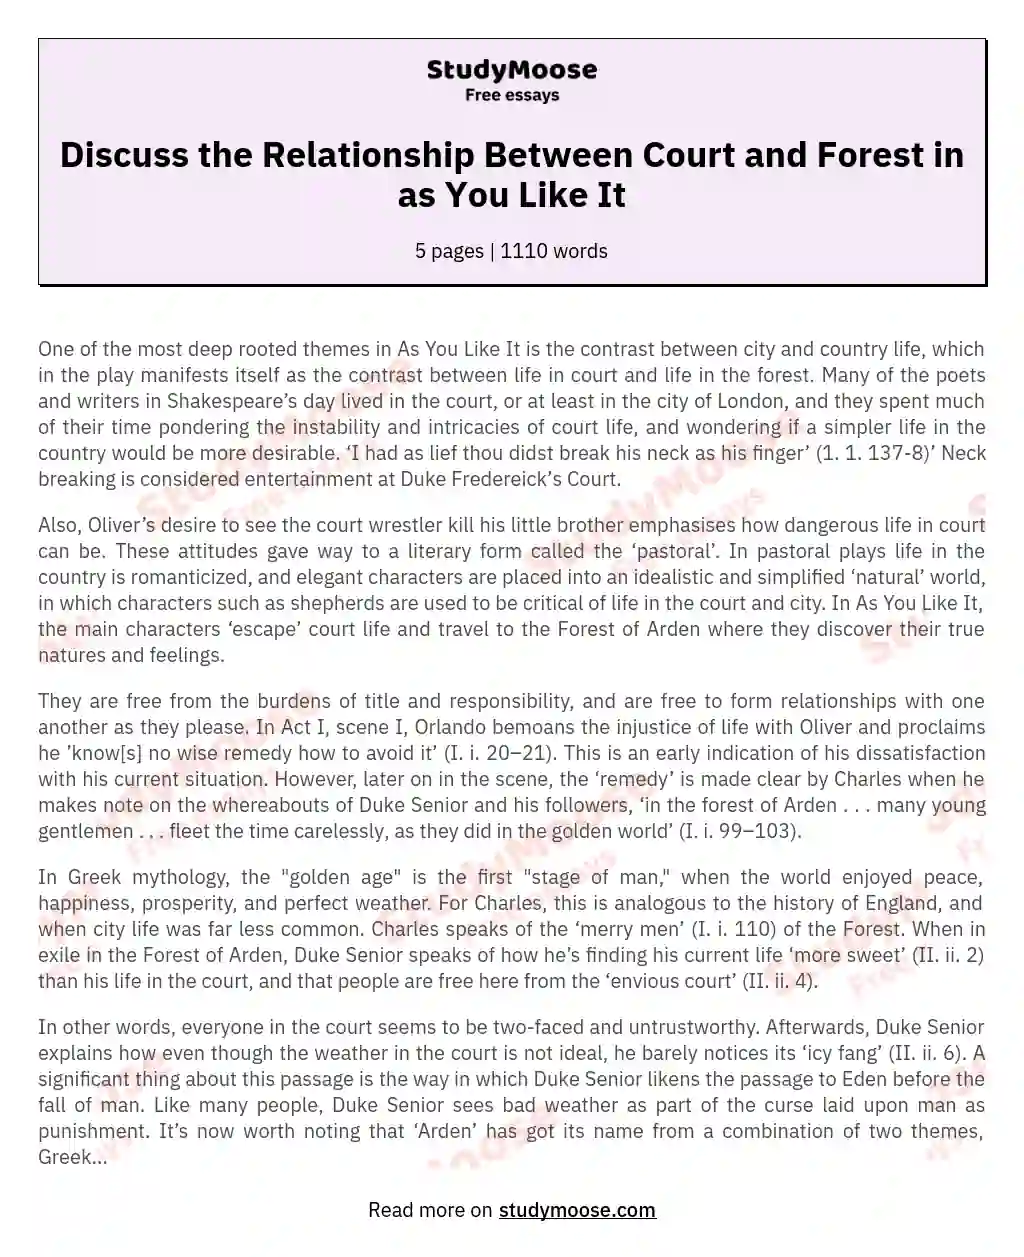 Discuss the Relationship Between Court and Forest in as You Like It essay